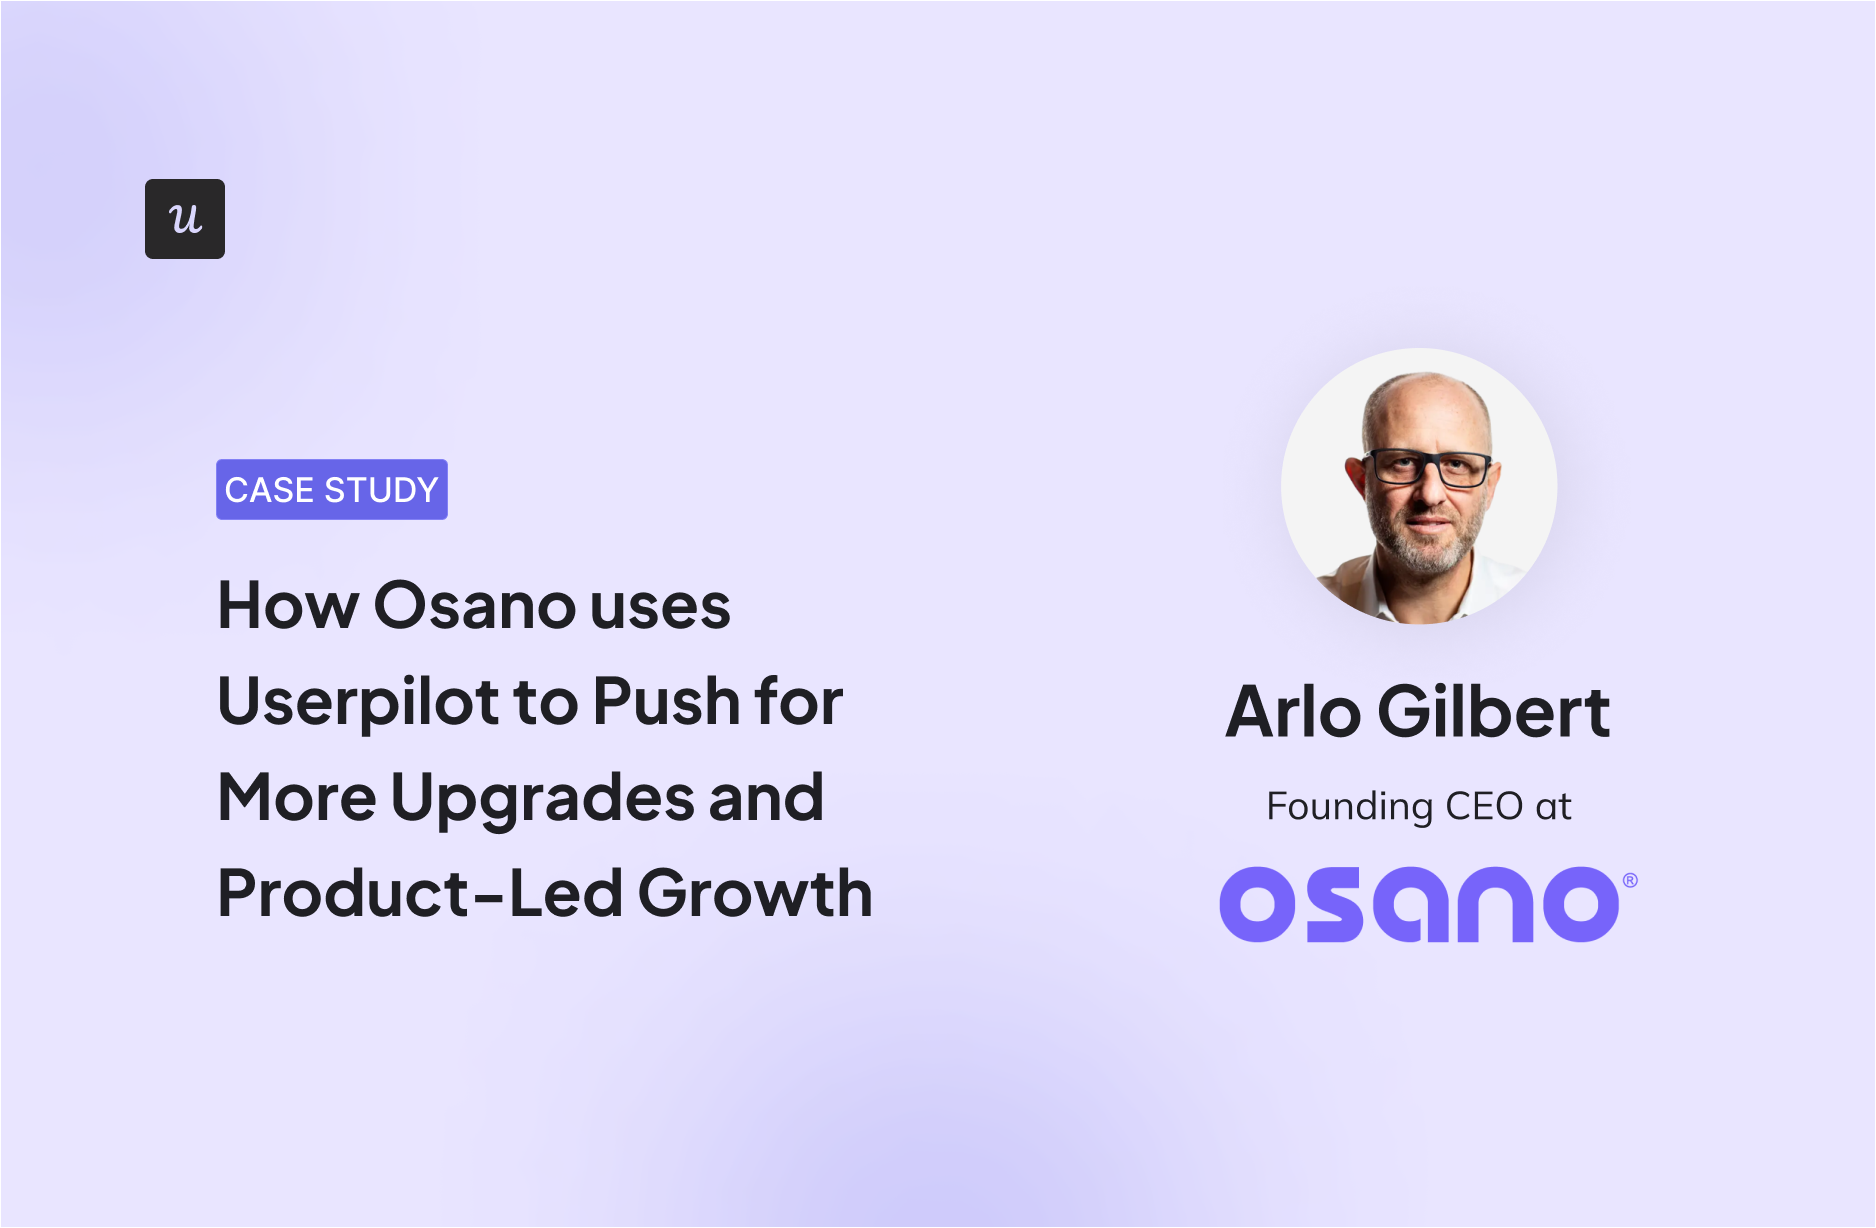 How Osano uses Userpilot to Push for More Upgrades and Product-Led Growth